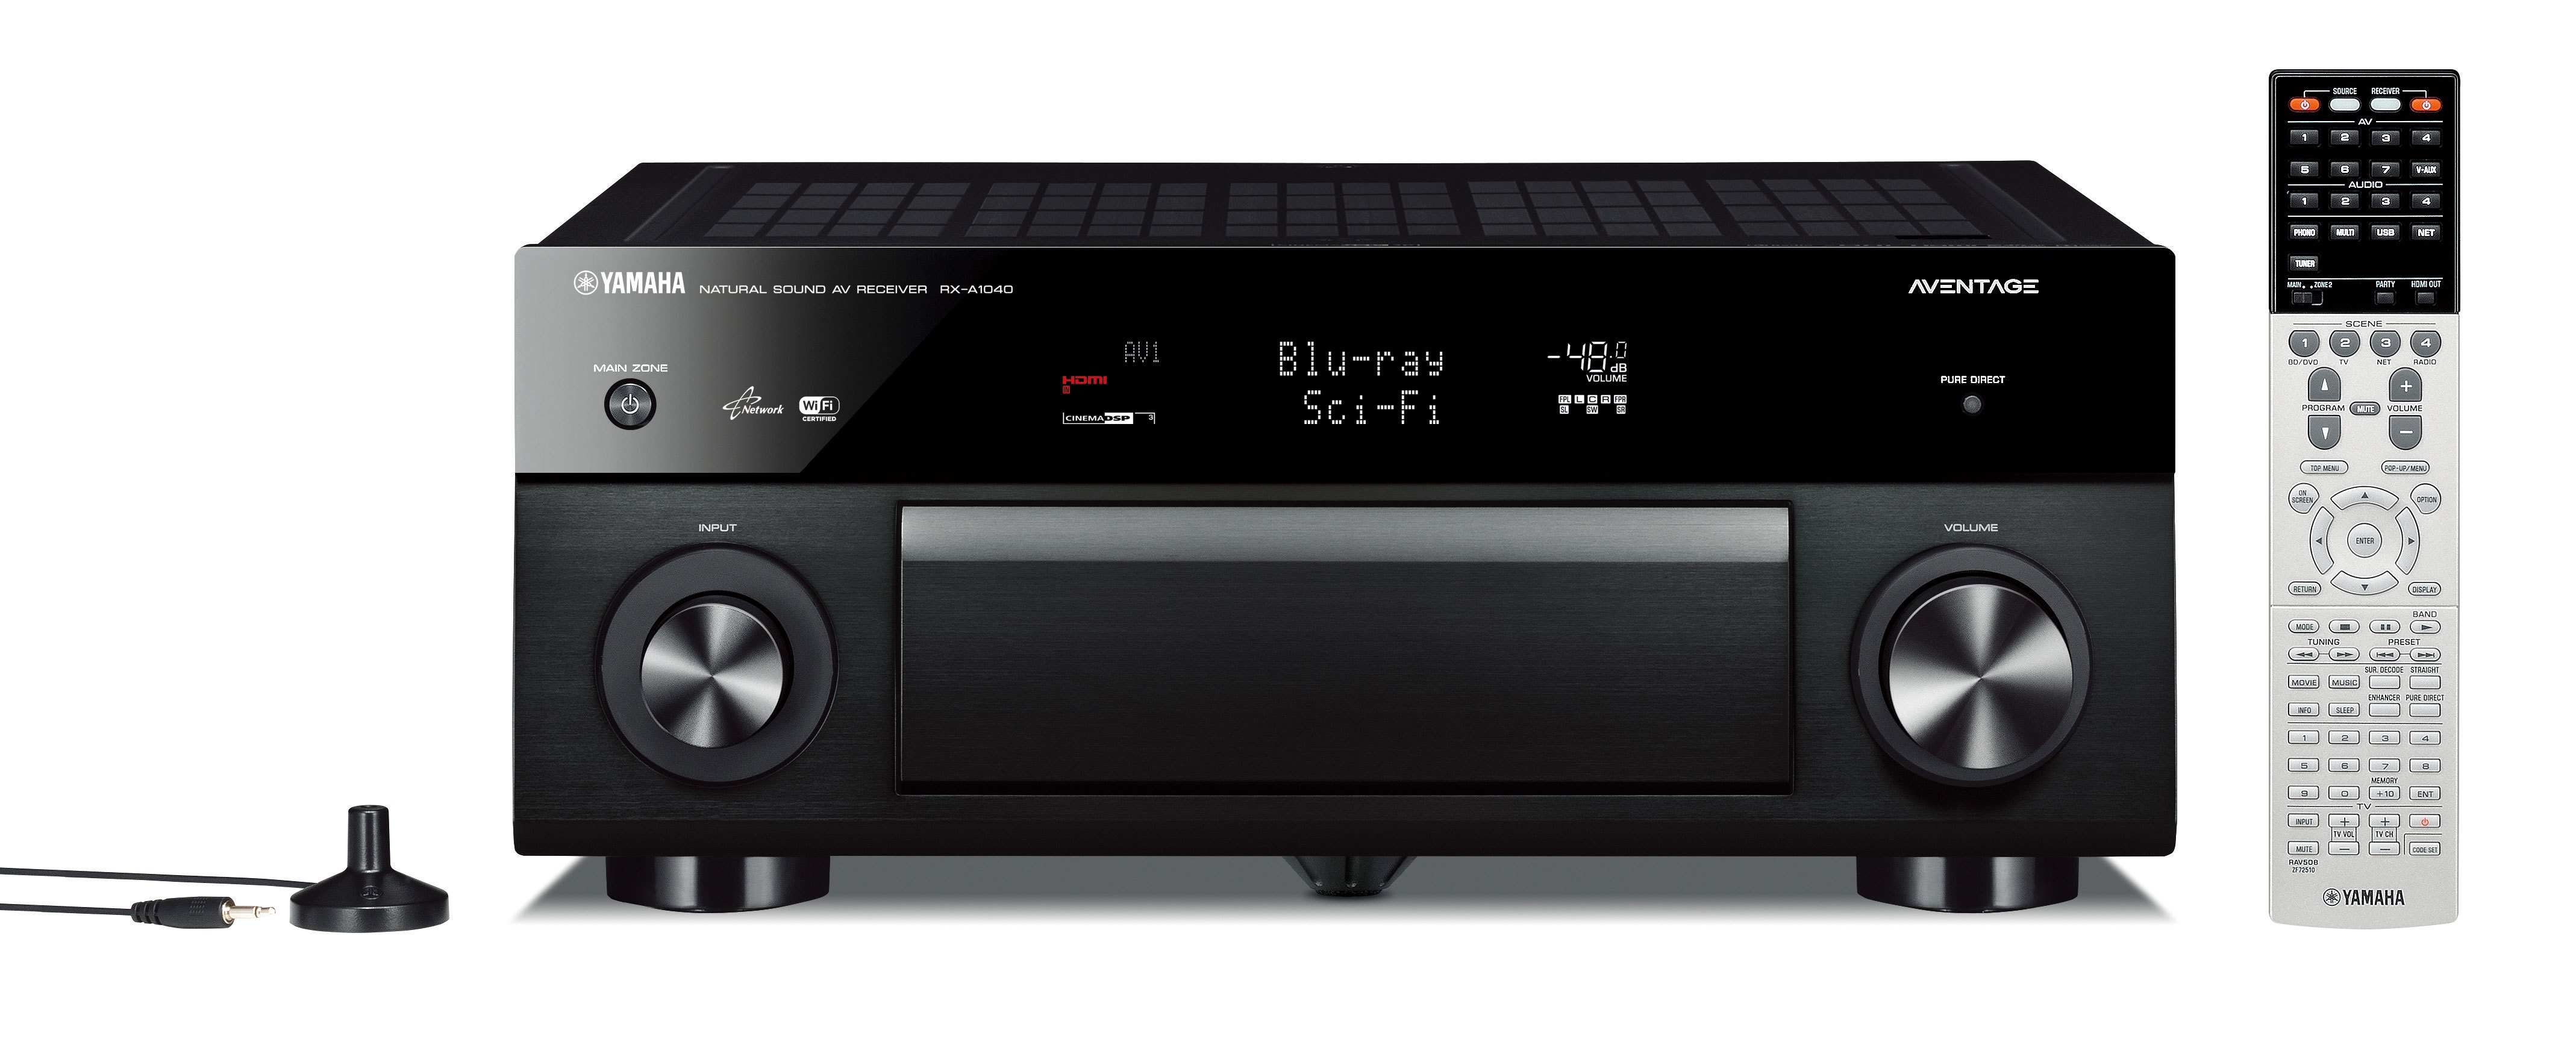 RX-A1040 - Overview - AV Receivers - Audio & Visual - Products 